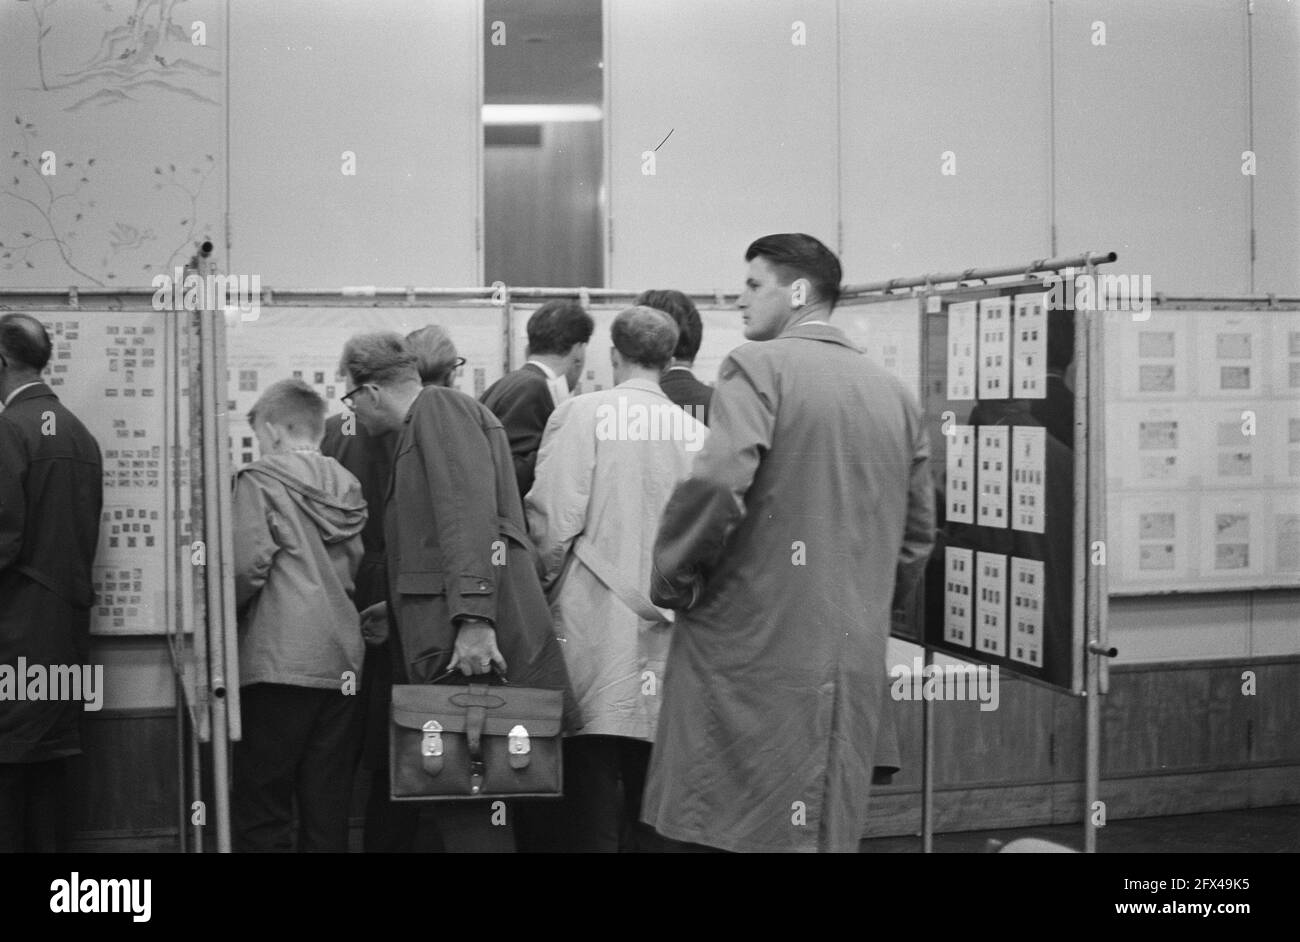 The Day of the Stamps in the St. John's Hall in Krasnapolski, October 7, 1962, POSTAGE STAMPS, The Netherlands, 20th century press agency photo, news to remember, documentary, historic photography 1945-1990, visual stories, human history of the Twentieth Century, capturing moments in time Stock Photo